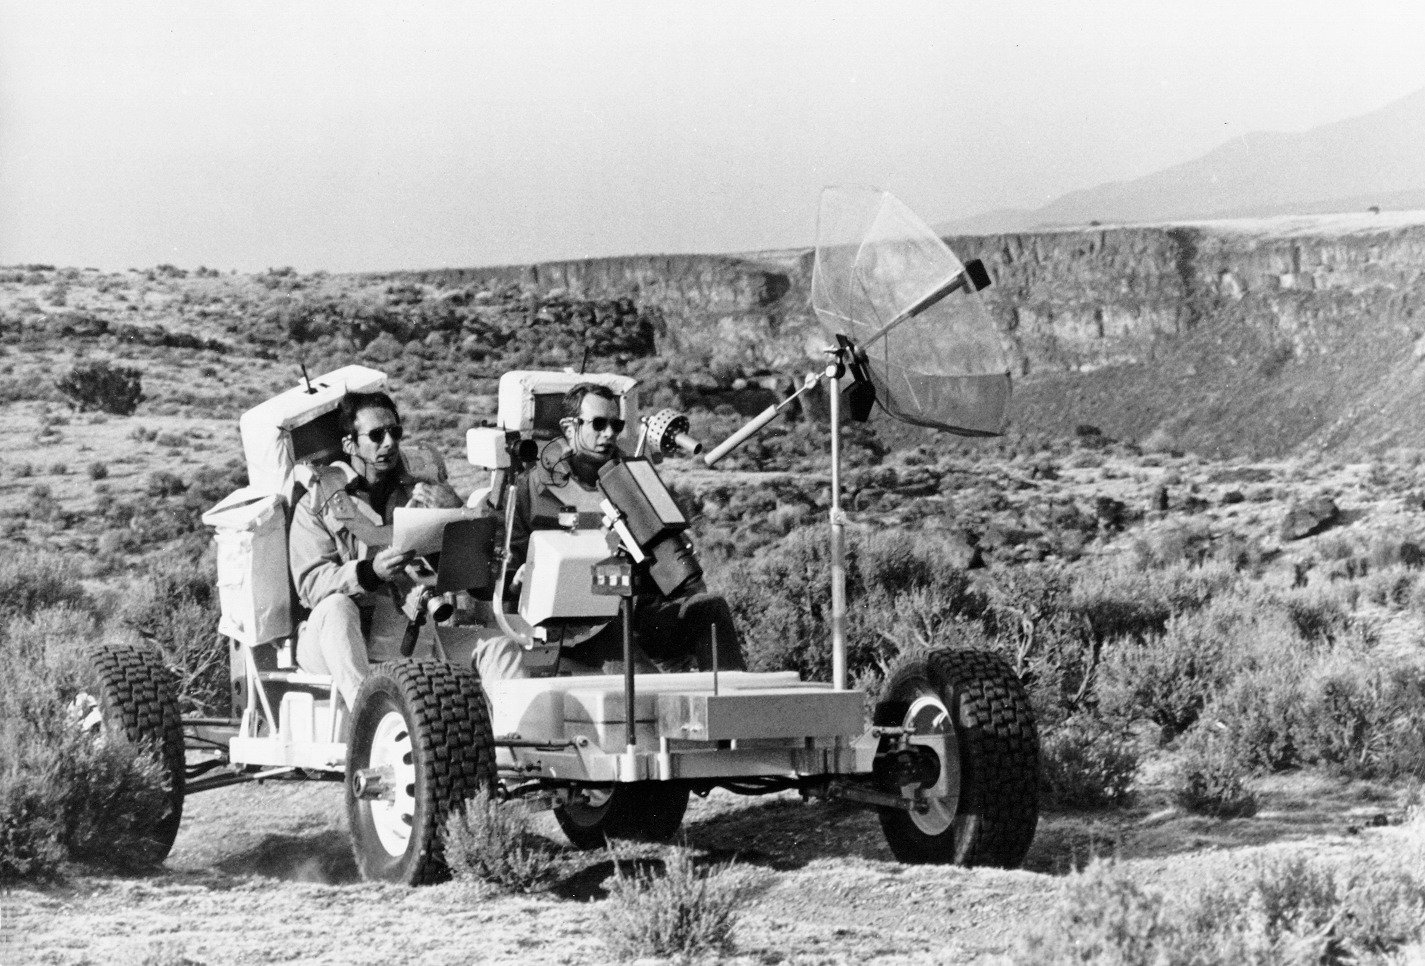 "Dave Scott (right) and Jim Irwin (left) drive the Geologic Rover ( aka Grover) along the rim of the Rio Grande Gorge at Taos, New Mexico. At this location, the Rio Grande Gorge is about the same width as Hadley Rille at the Apollo 15 landing site. During this training exercise, Dave and Jim conducted a geologic investigation similar to the one they later did at Hadley. Ulli Lotzmann notes that the 1g trainer was also known as the Geology Rover or Grover." Credit: NASA